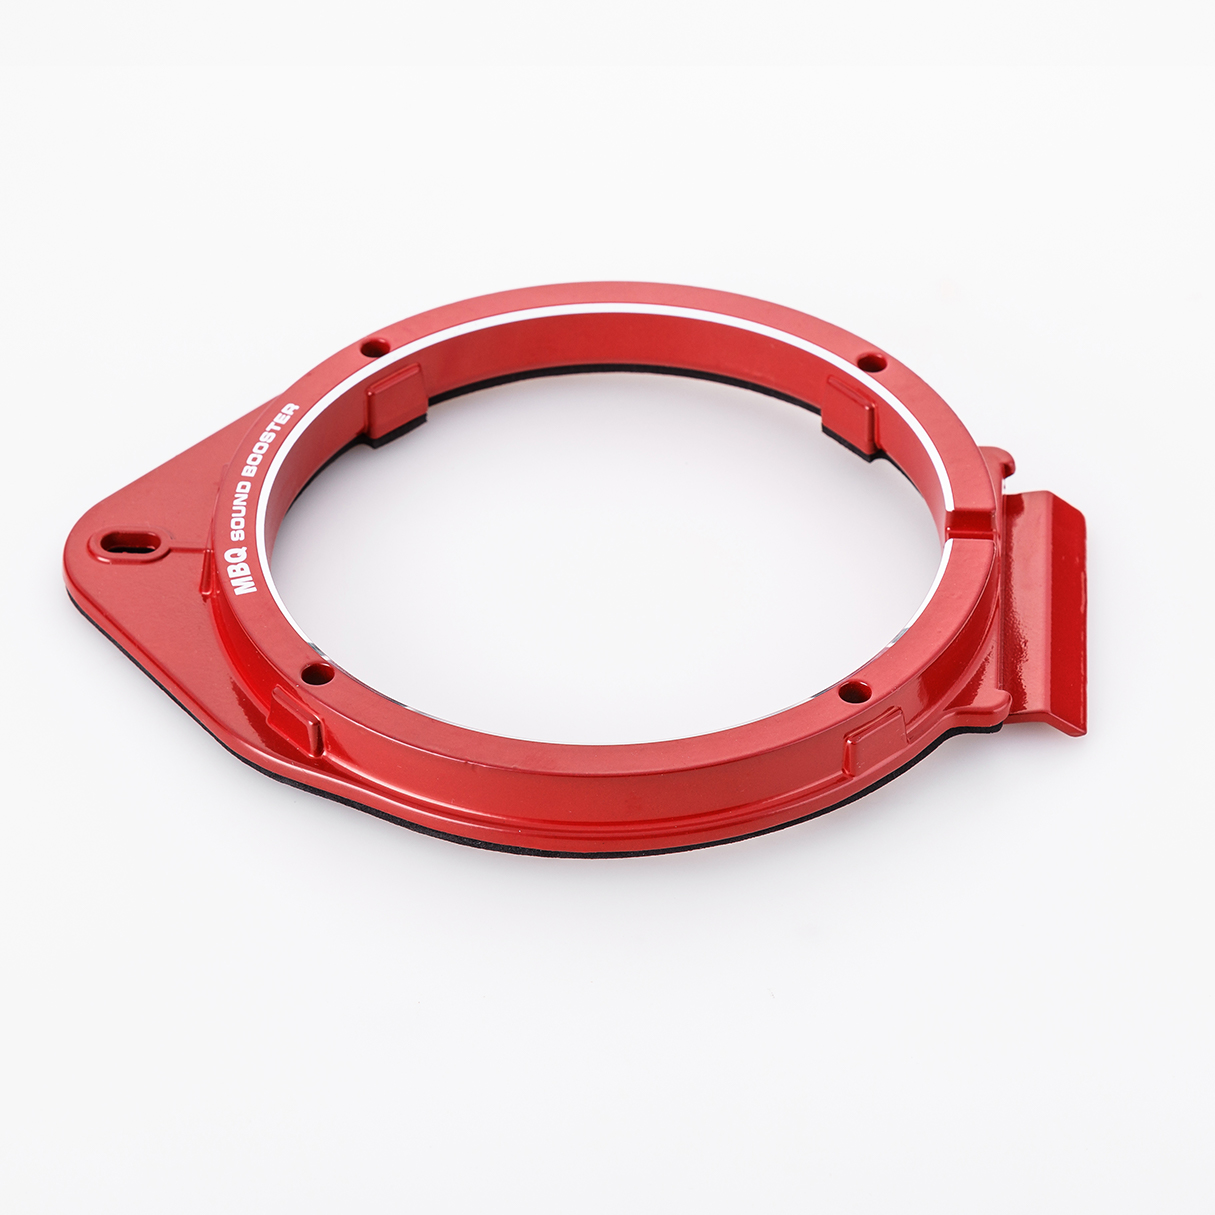 SAR-005 Car Audio Speaker Accessories 6.5 inch Aluminum Adapter Speaker Mounting Spacer Ring for GM Vehicles